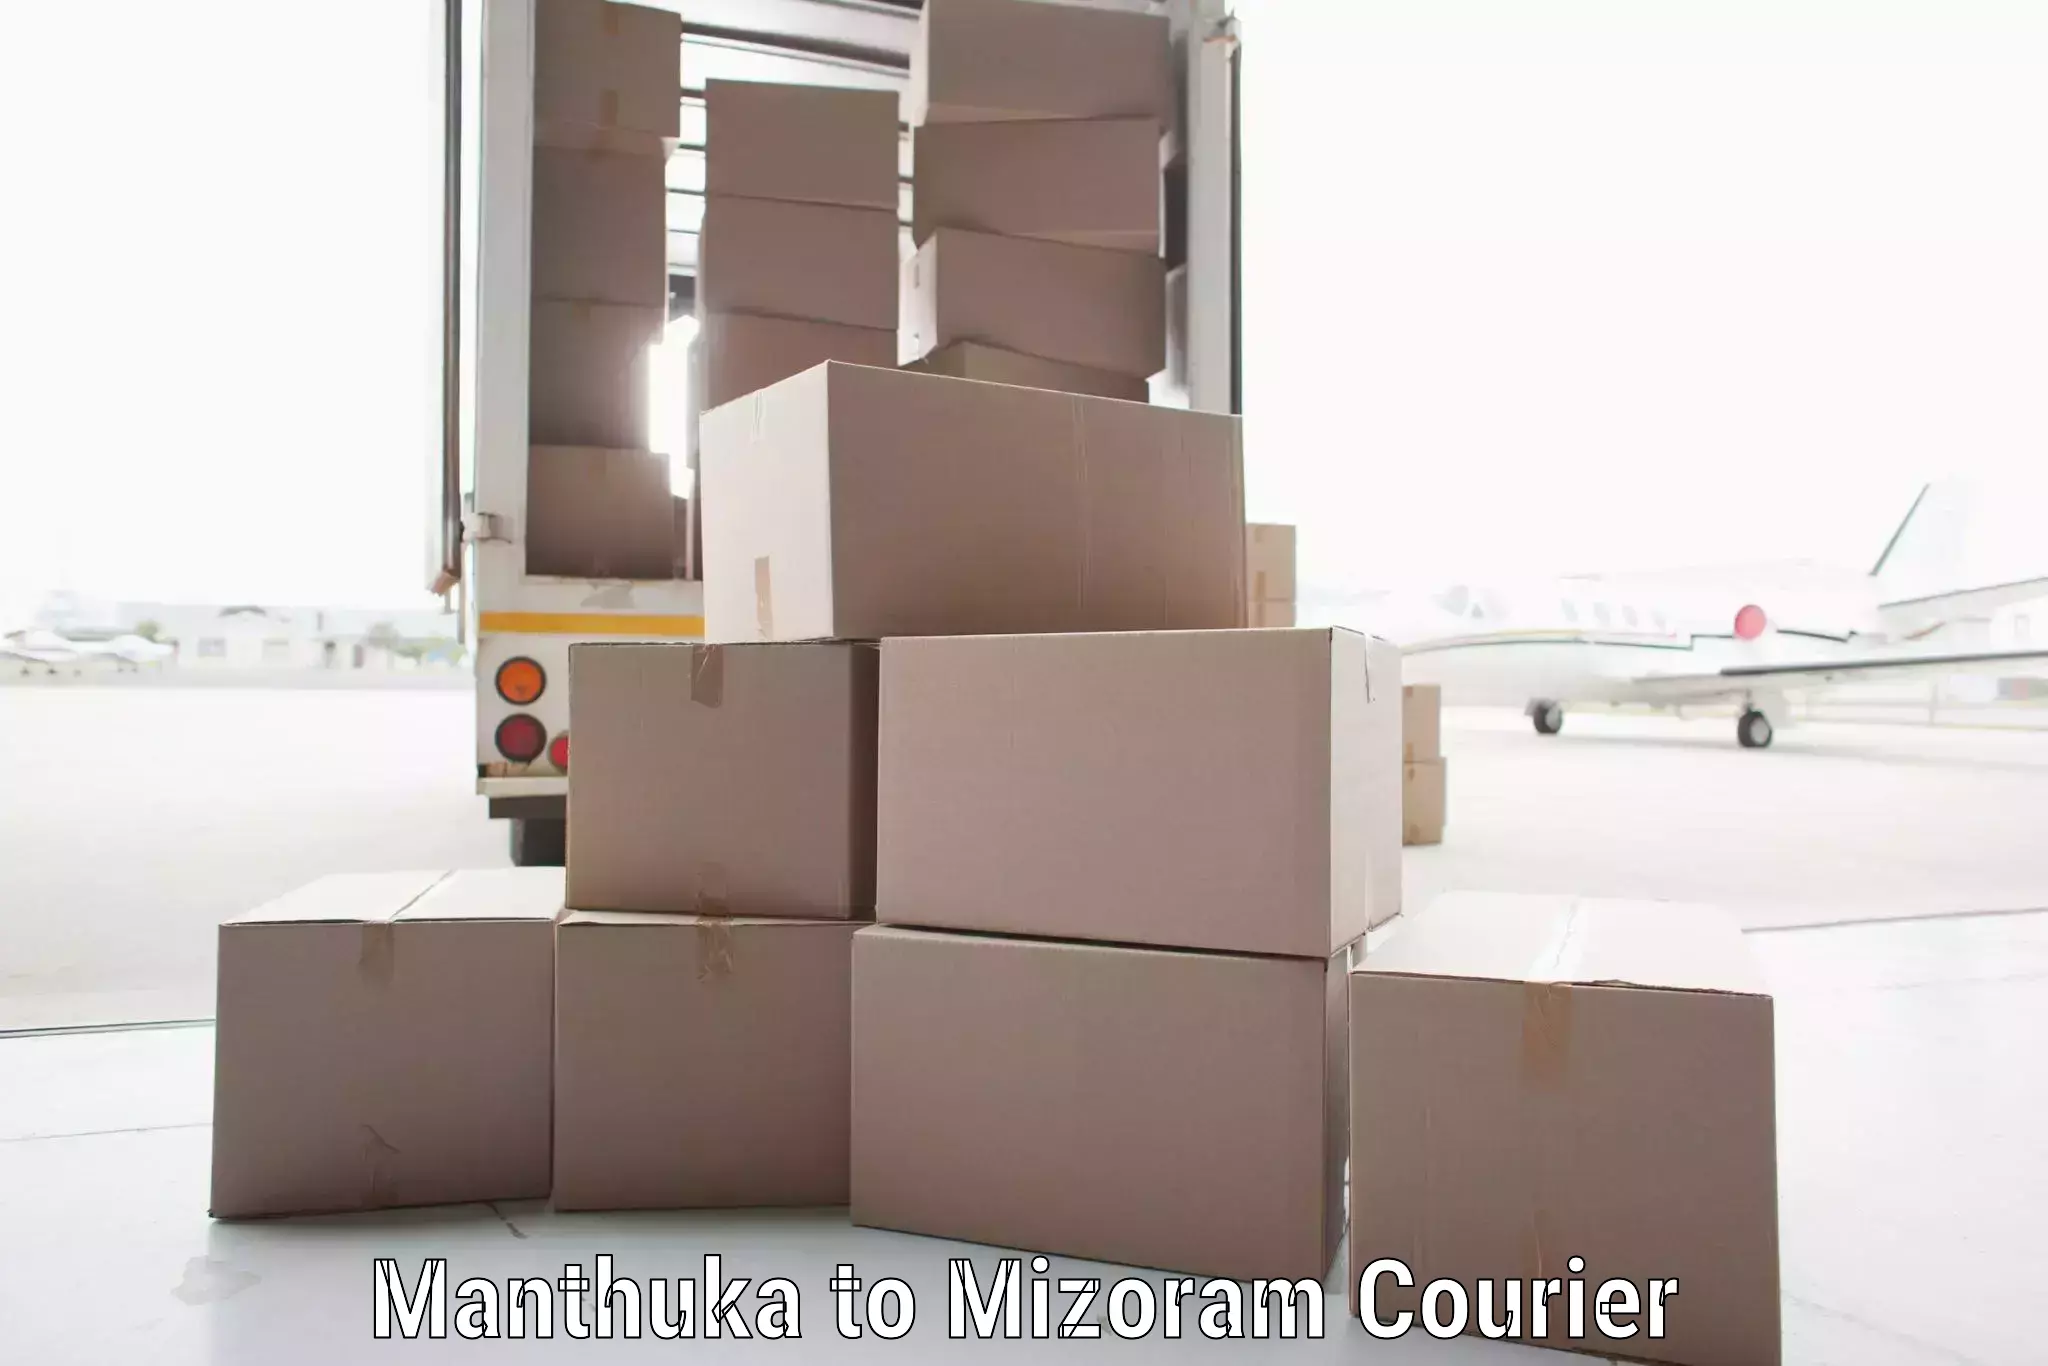 Multi-service courier options in Manthuka to Siaha